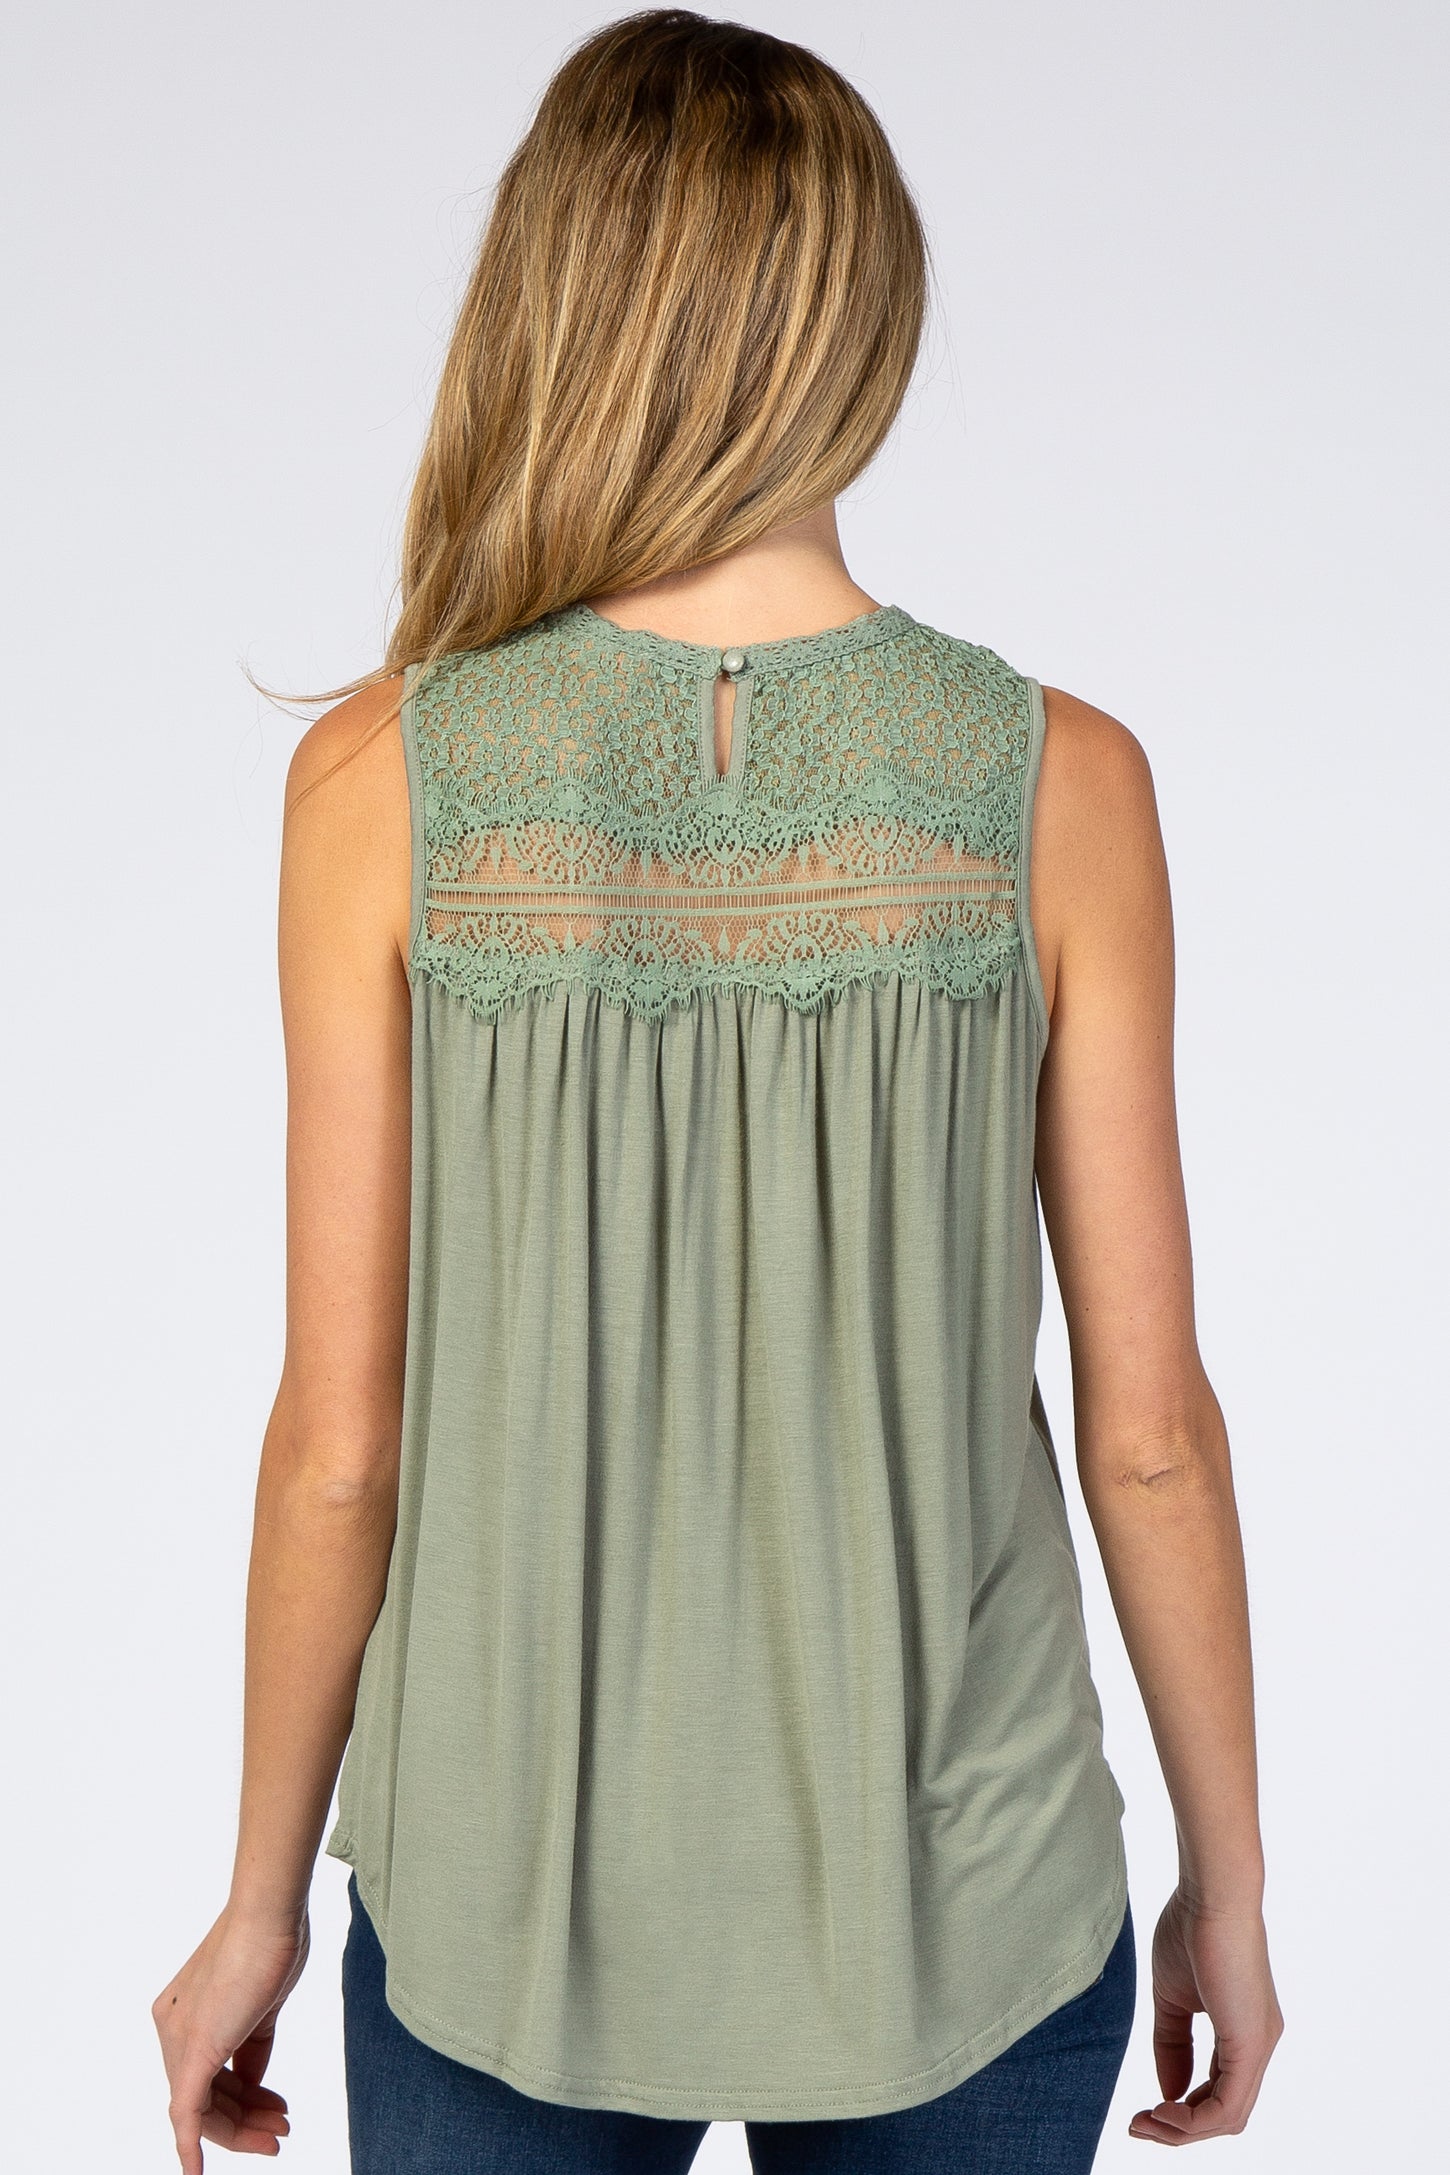 Light Olive Lace Inset Maternity Tank Top